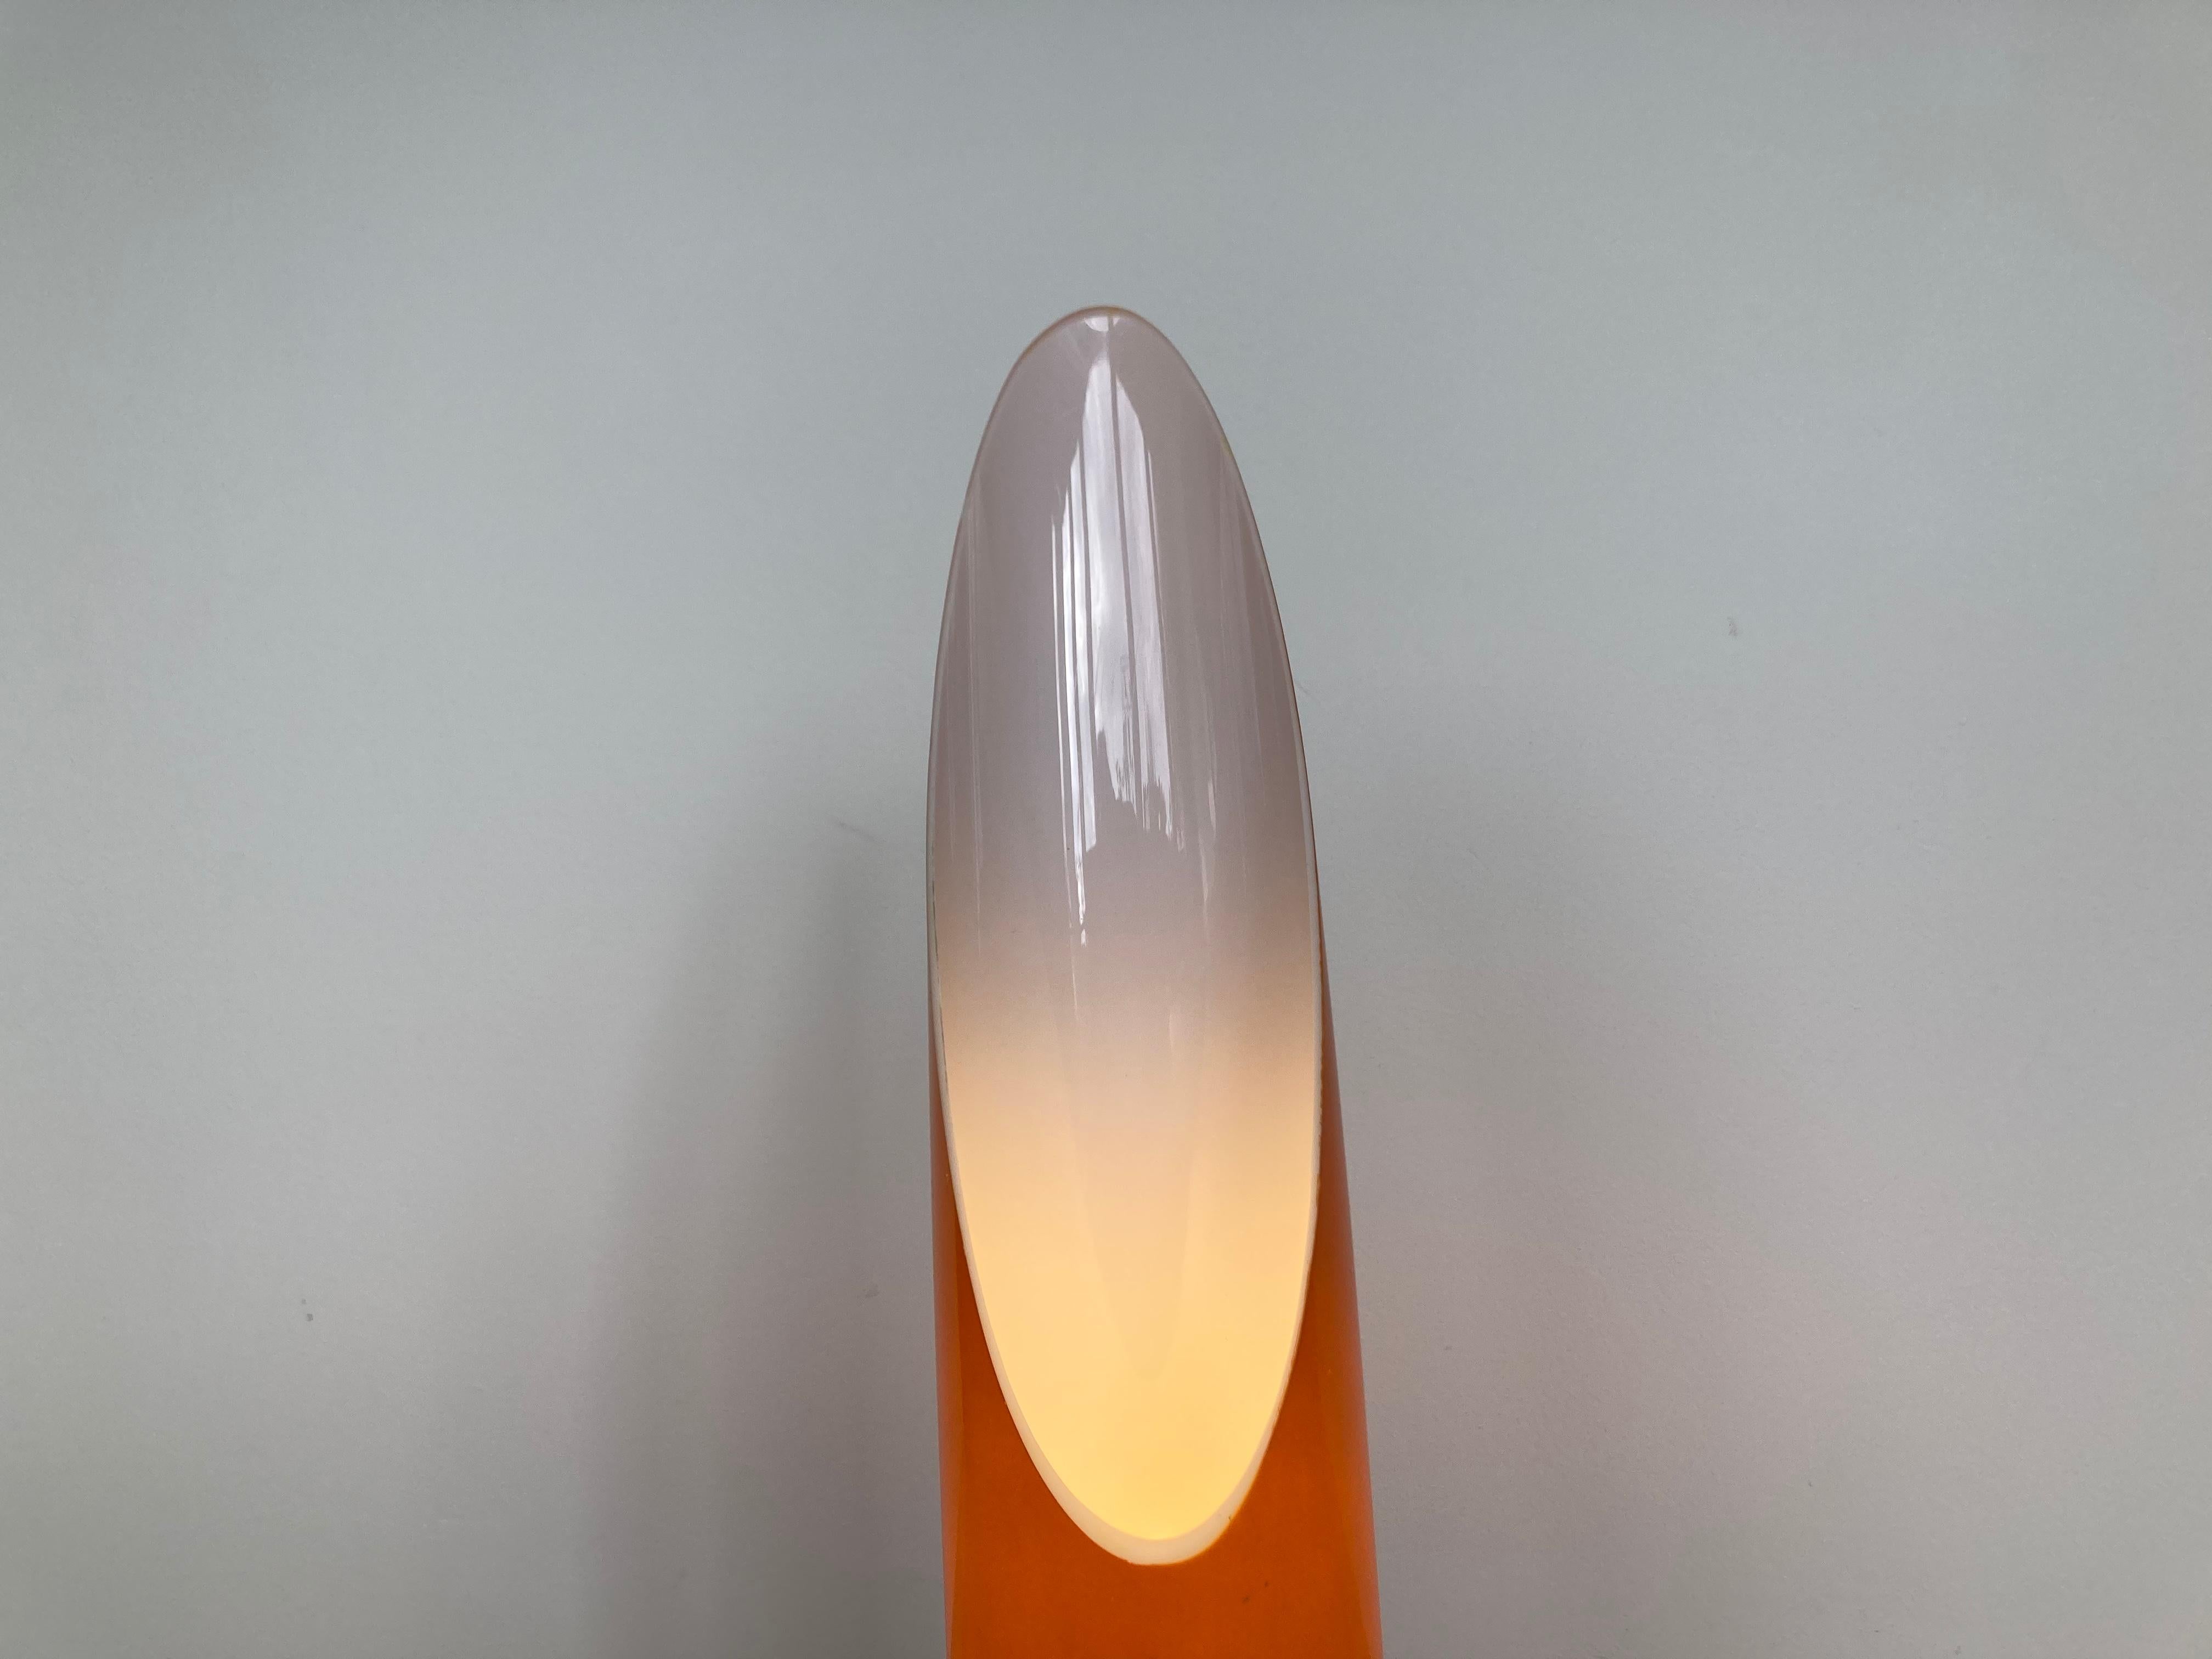 Rare Midcentury Design Floor or Table Lamp, Germany, 1970s In Good Condition For Sale In Praha, CZ